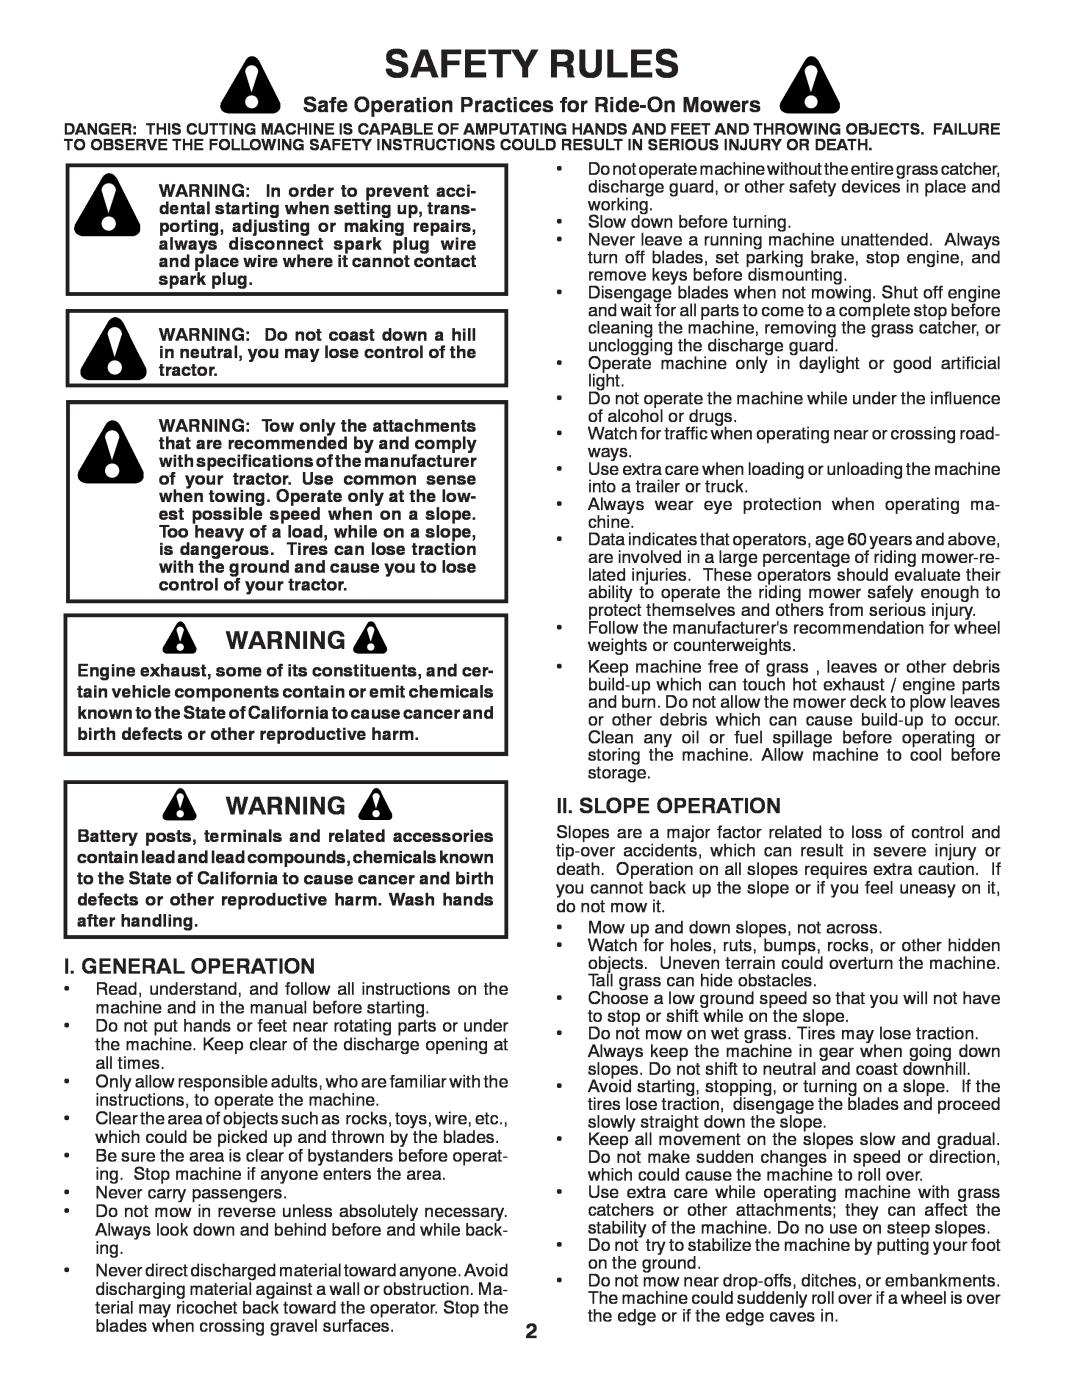 Poulan PO15542LT manual Safety Rules, Safe Operation Practices for Ride-OnMowers, I. General Operation, Ii. Slope Operation 